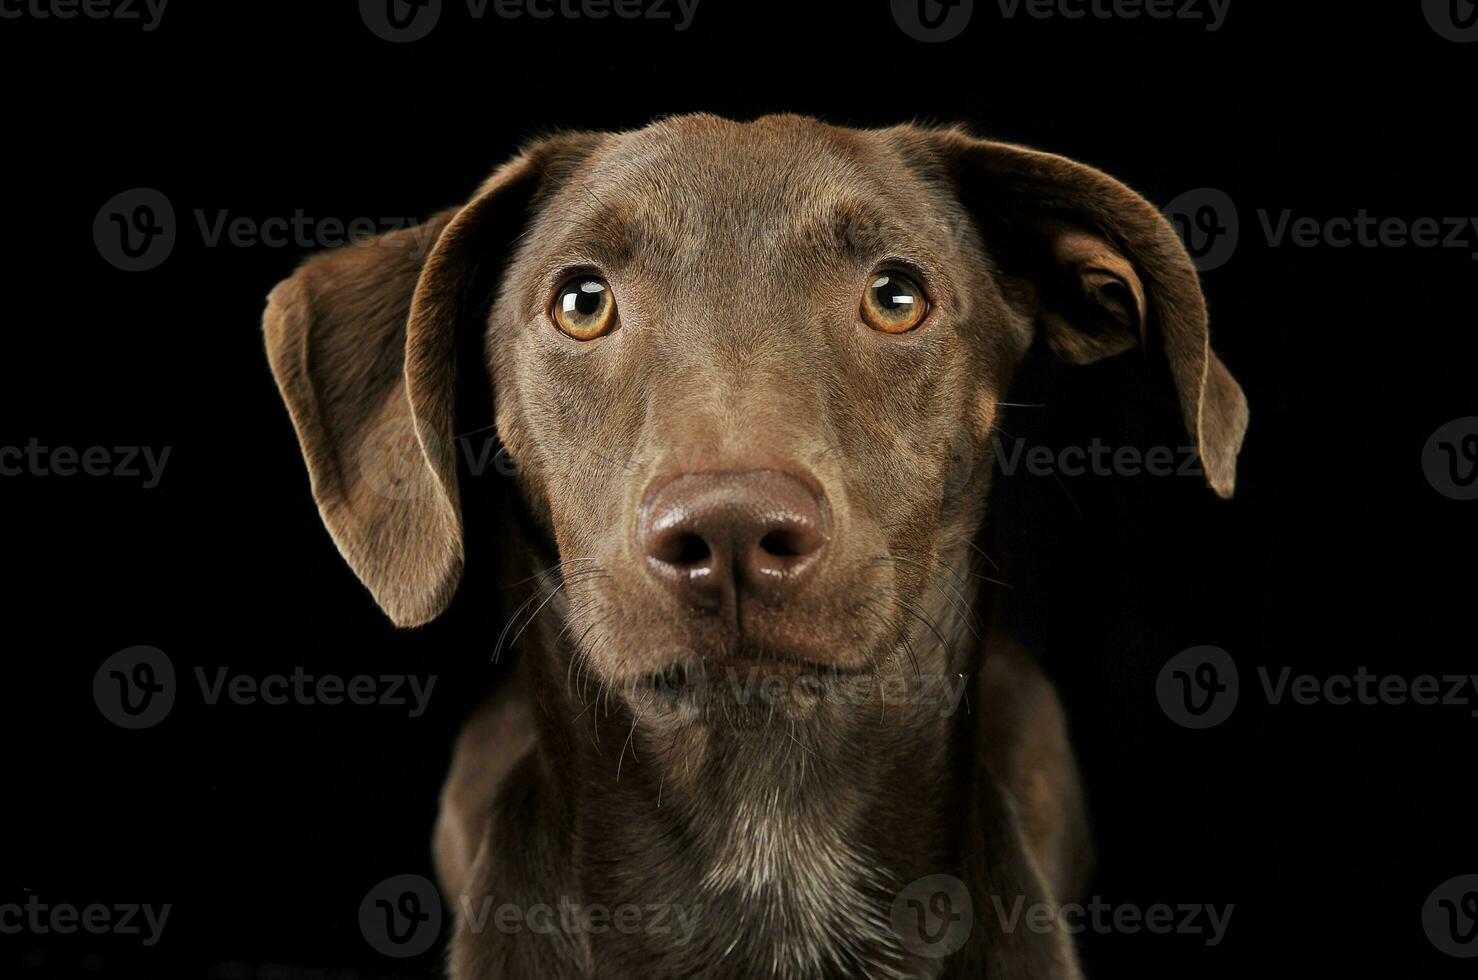 beautiful flying ears mixed breed dog portrait in black background photo